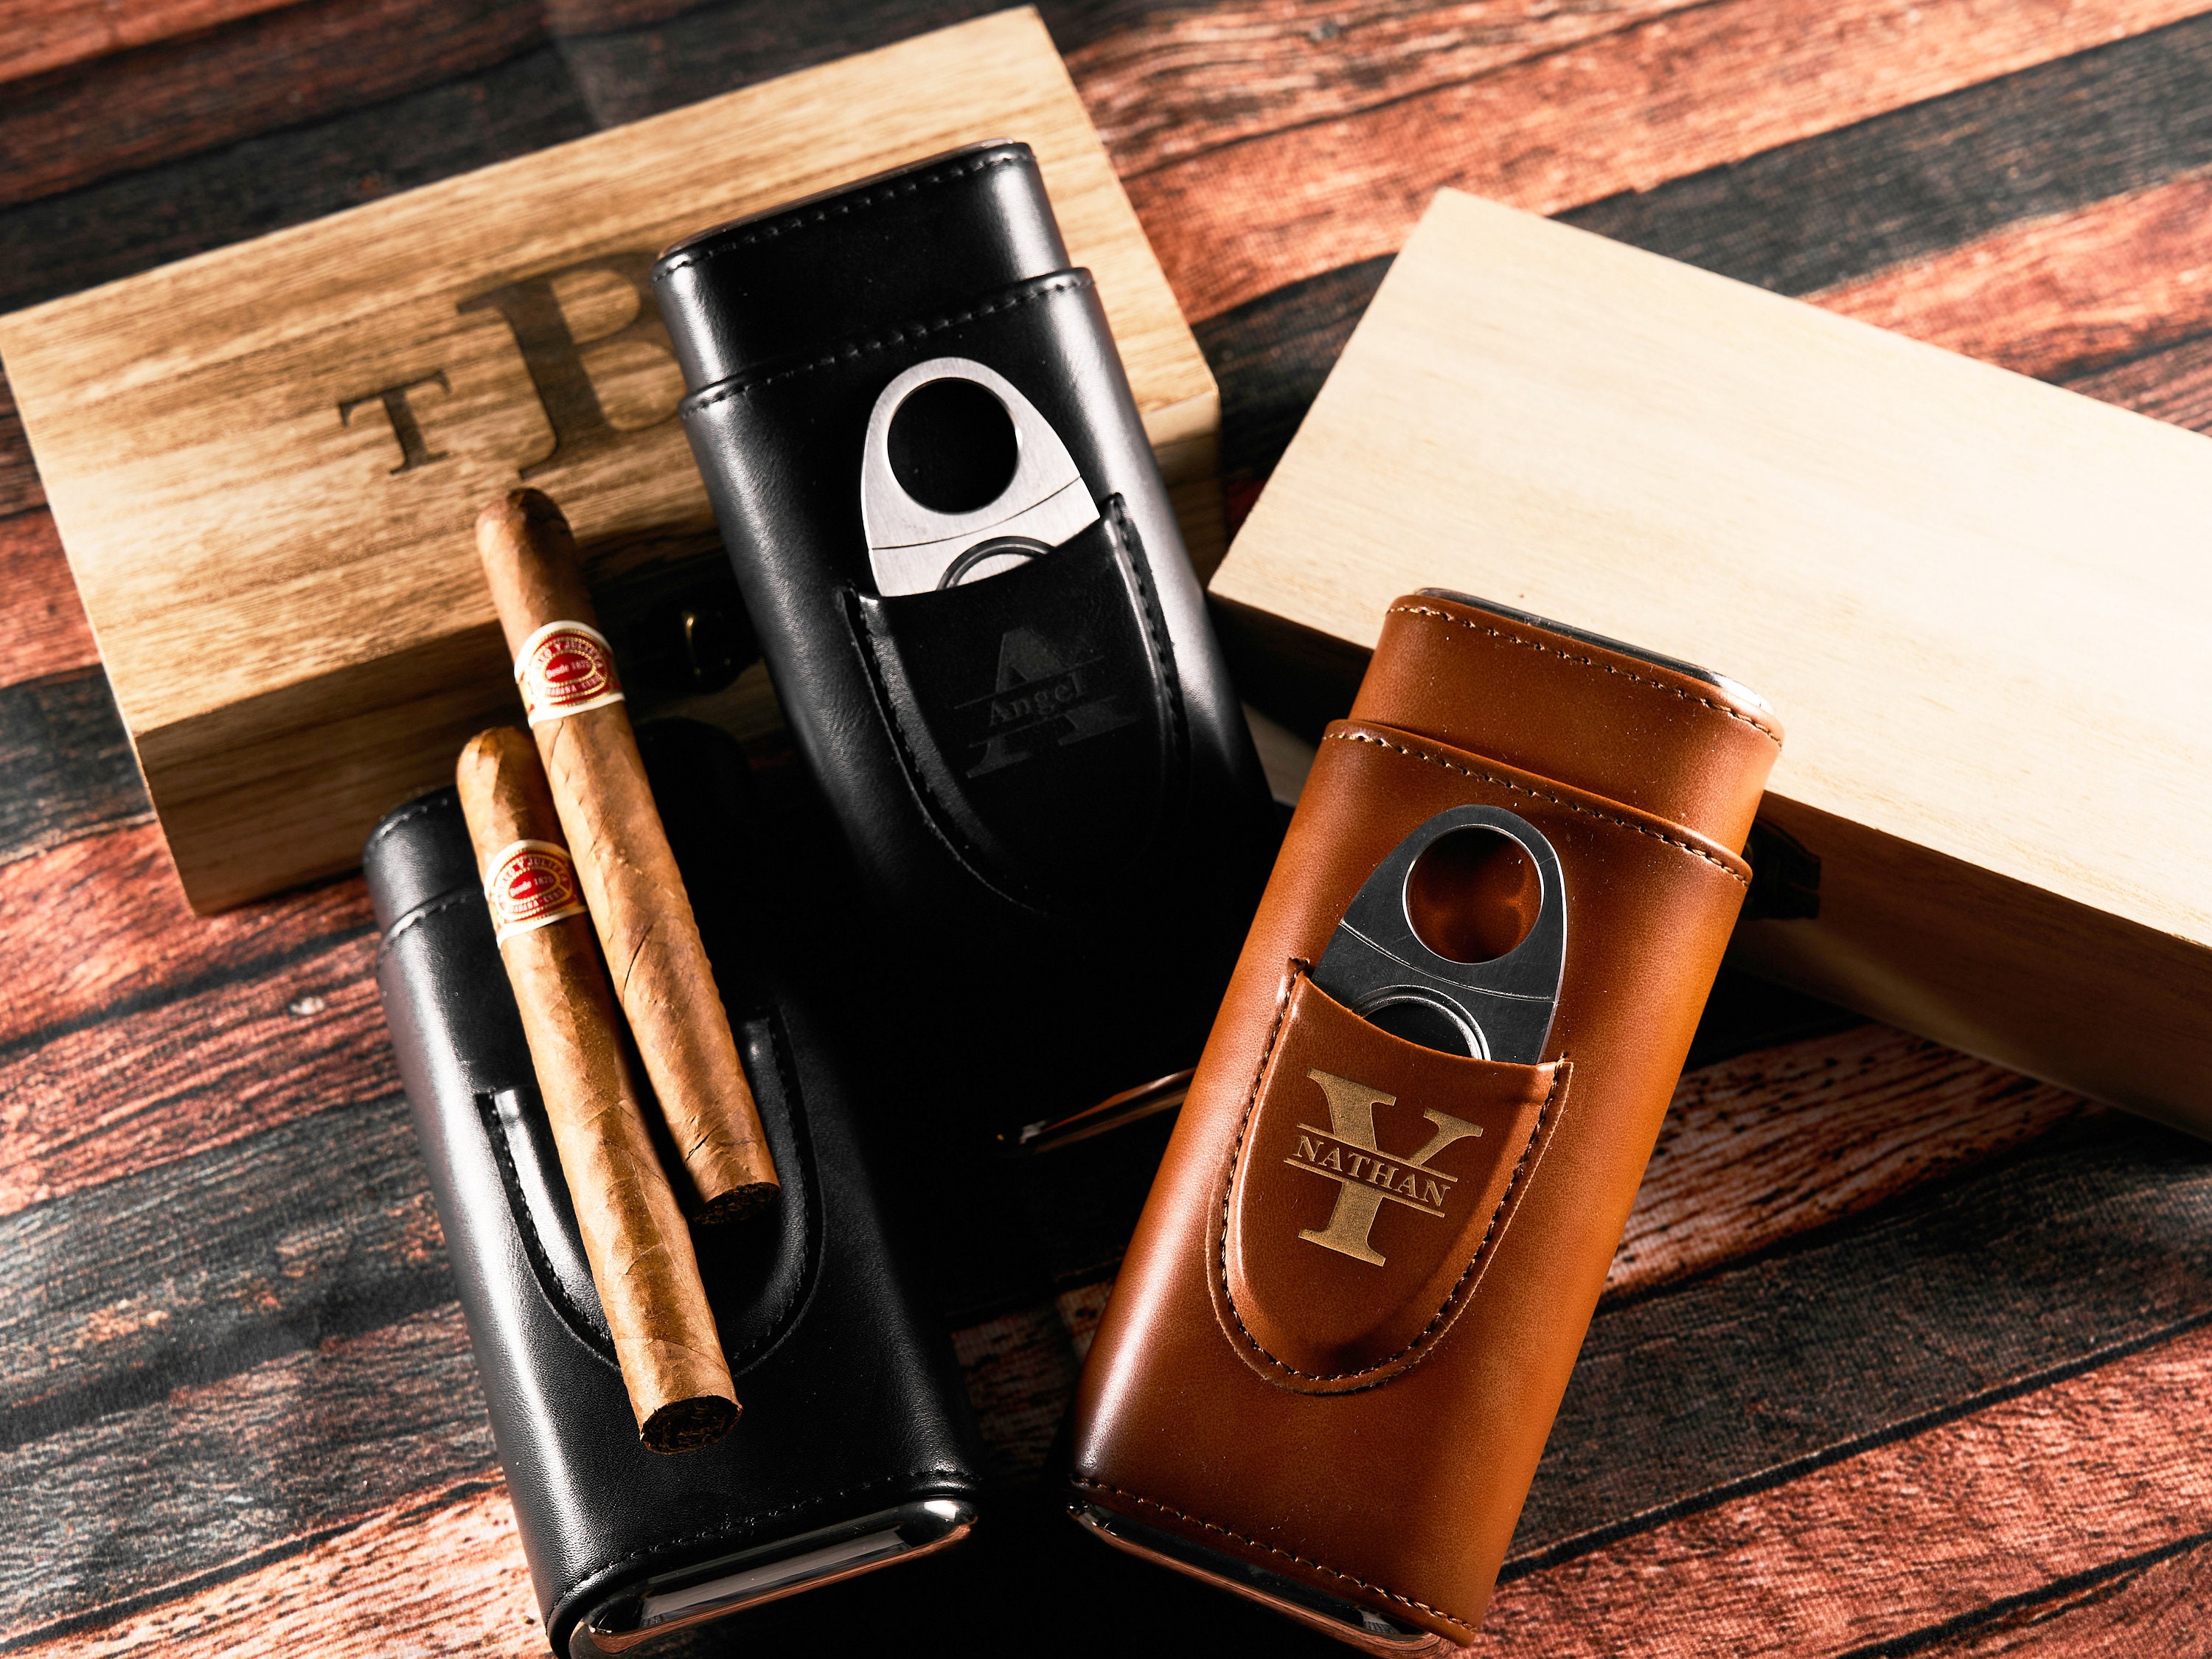 Cigars Case, Christmas Gifts for Him, Personalized Name, Cigar Accessories,  Leather Cigar Holder, Travel Humidor, Groomsmen Gifts 